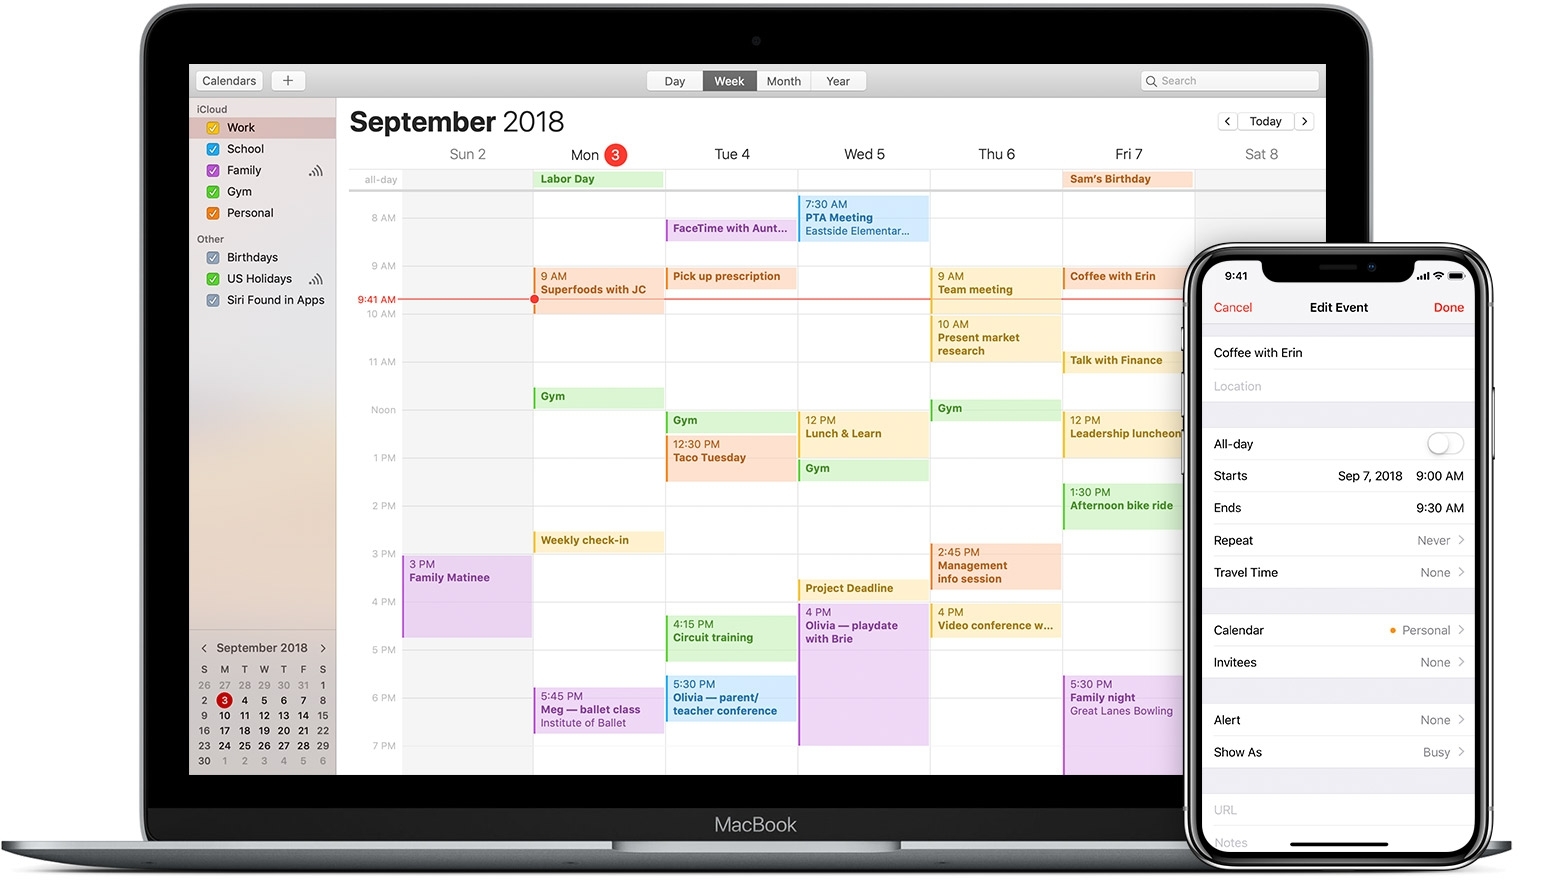 Keep Your Calendar Up To Date With Icloud - Apple Support